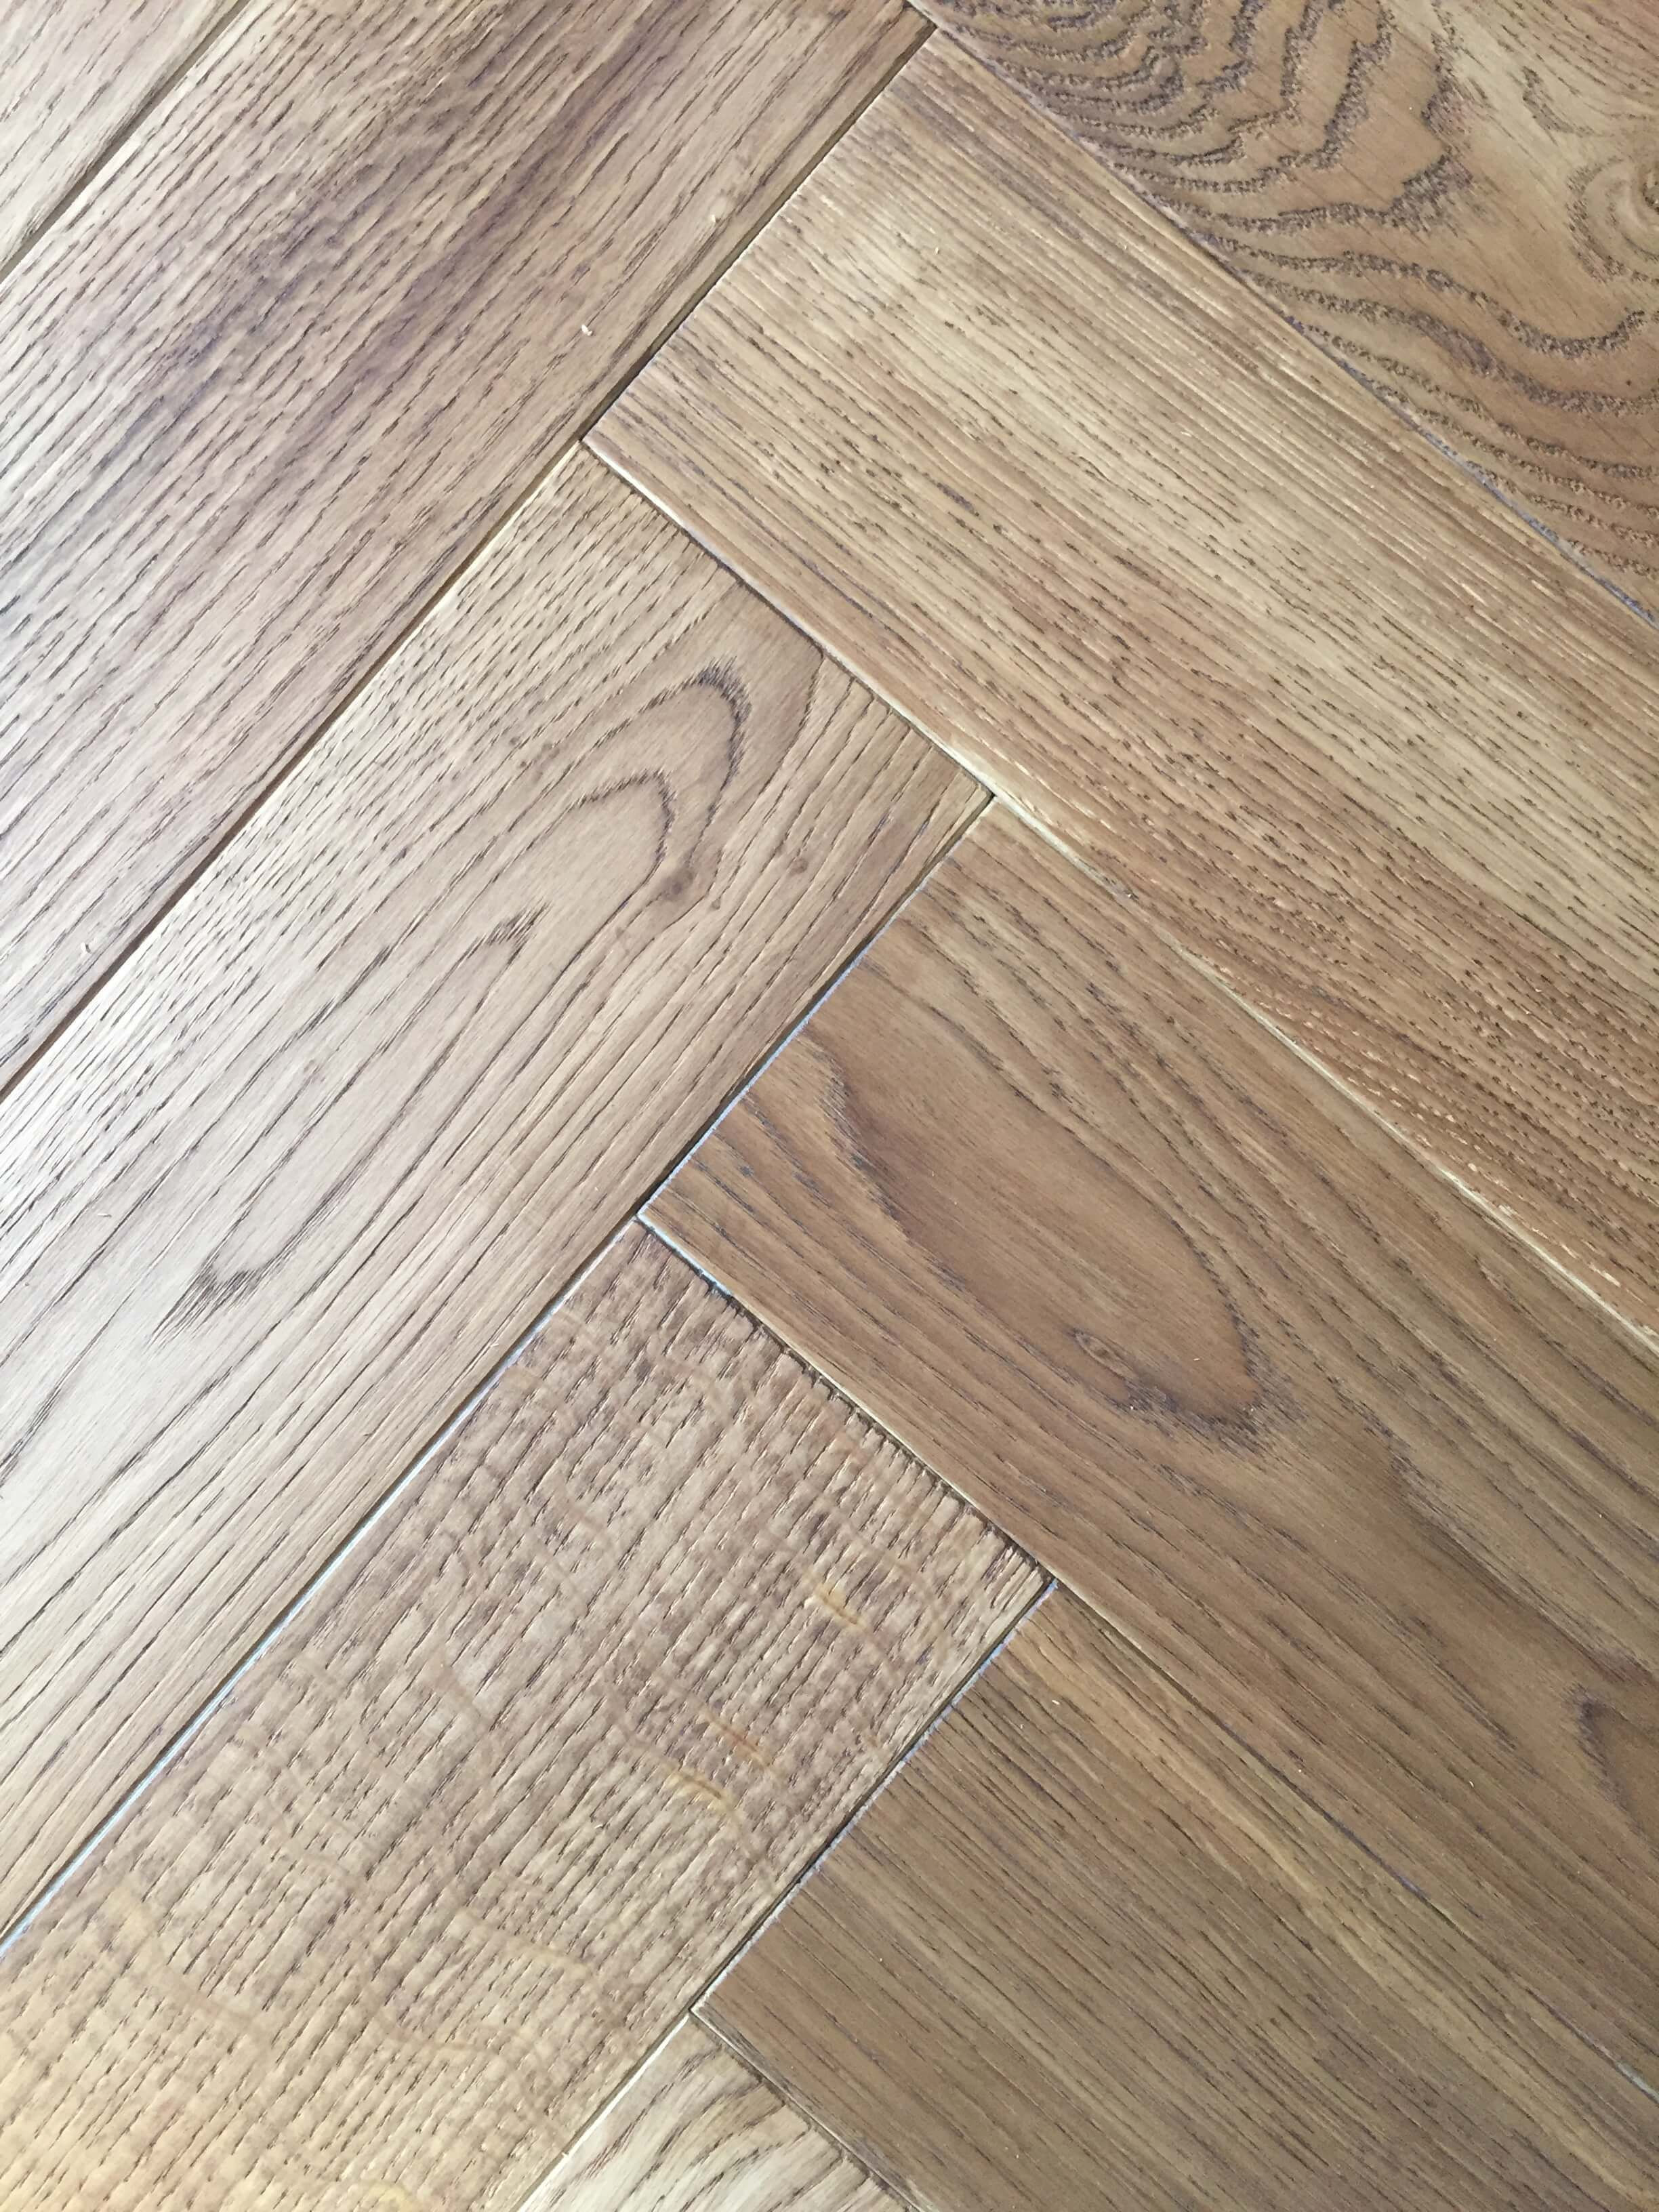 10 Fantastic What Does Hardwood Flooring Cost Per Square Foot 2024 free download what does hardwood flooring cost per square foot of wooden flooring price 4305 laminate flooring cost 50 luxury vinyl in cost uk wooden flooring price laminate flooring square foot price ins